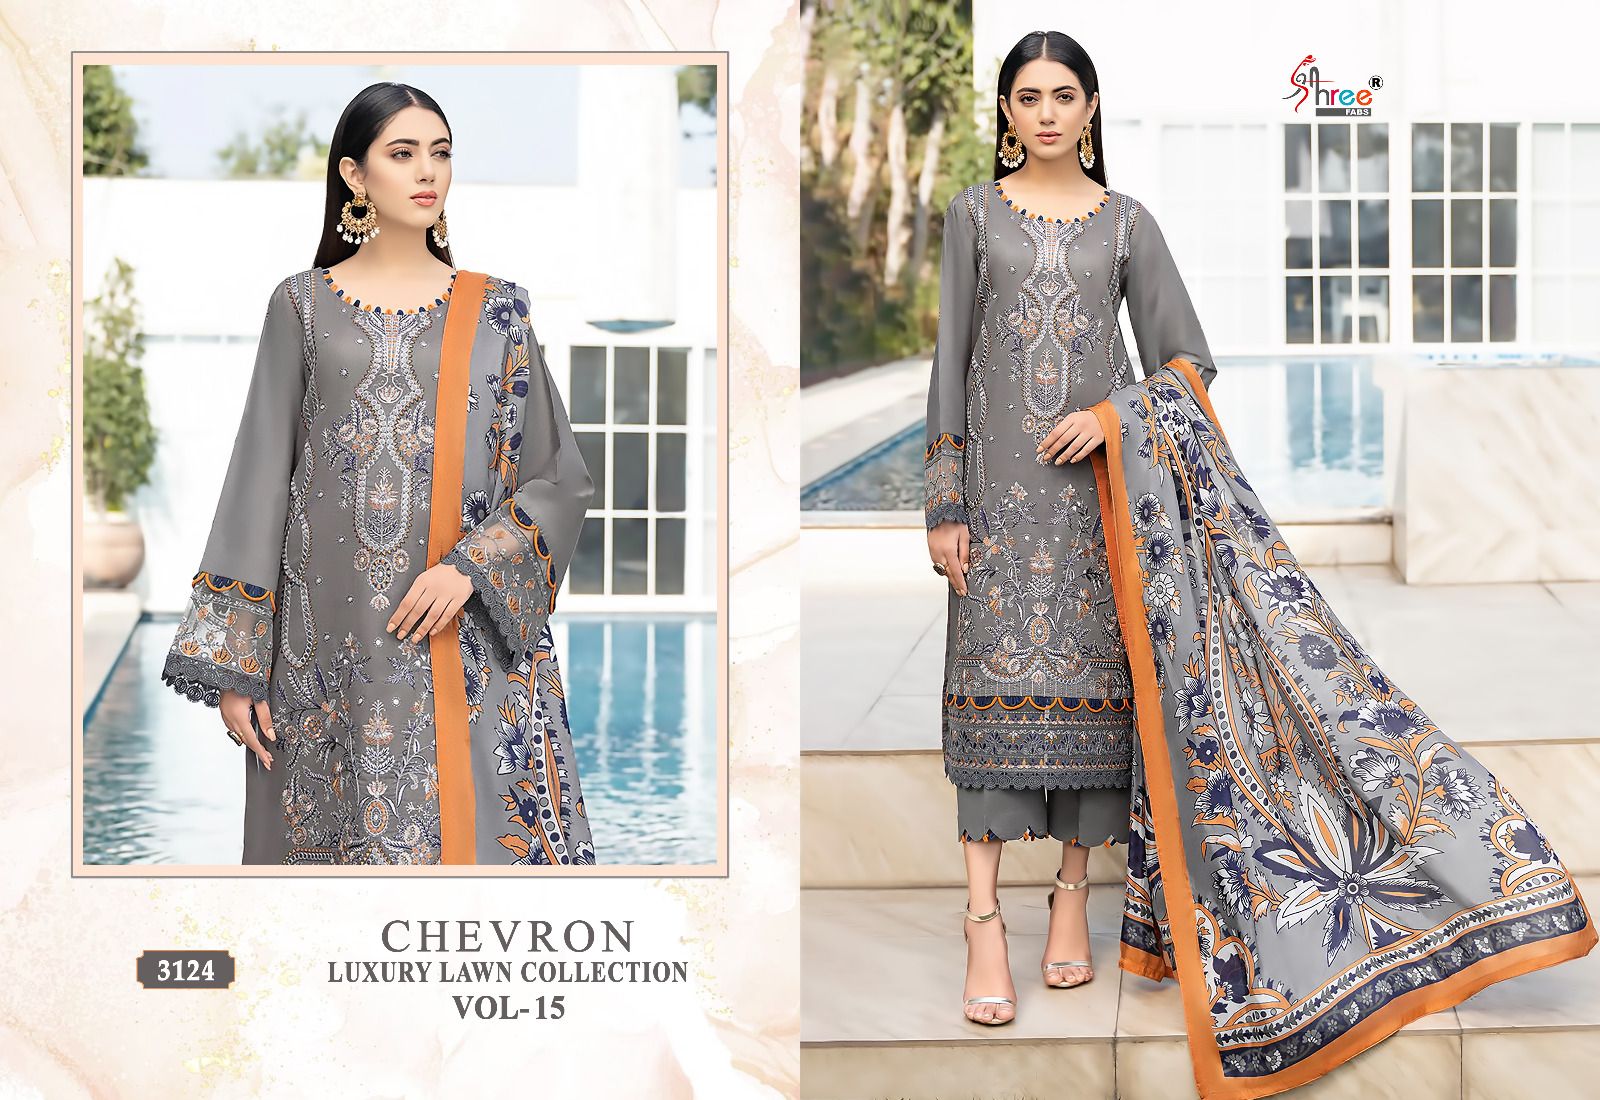 Shree Chevron Luxury Lawn Collection Vol 15 collection 9